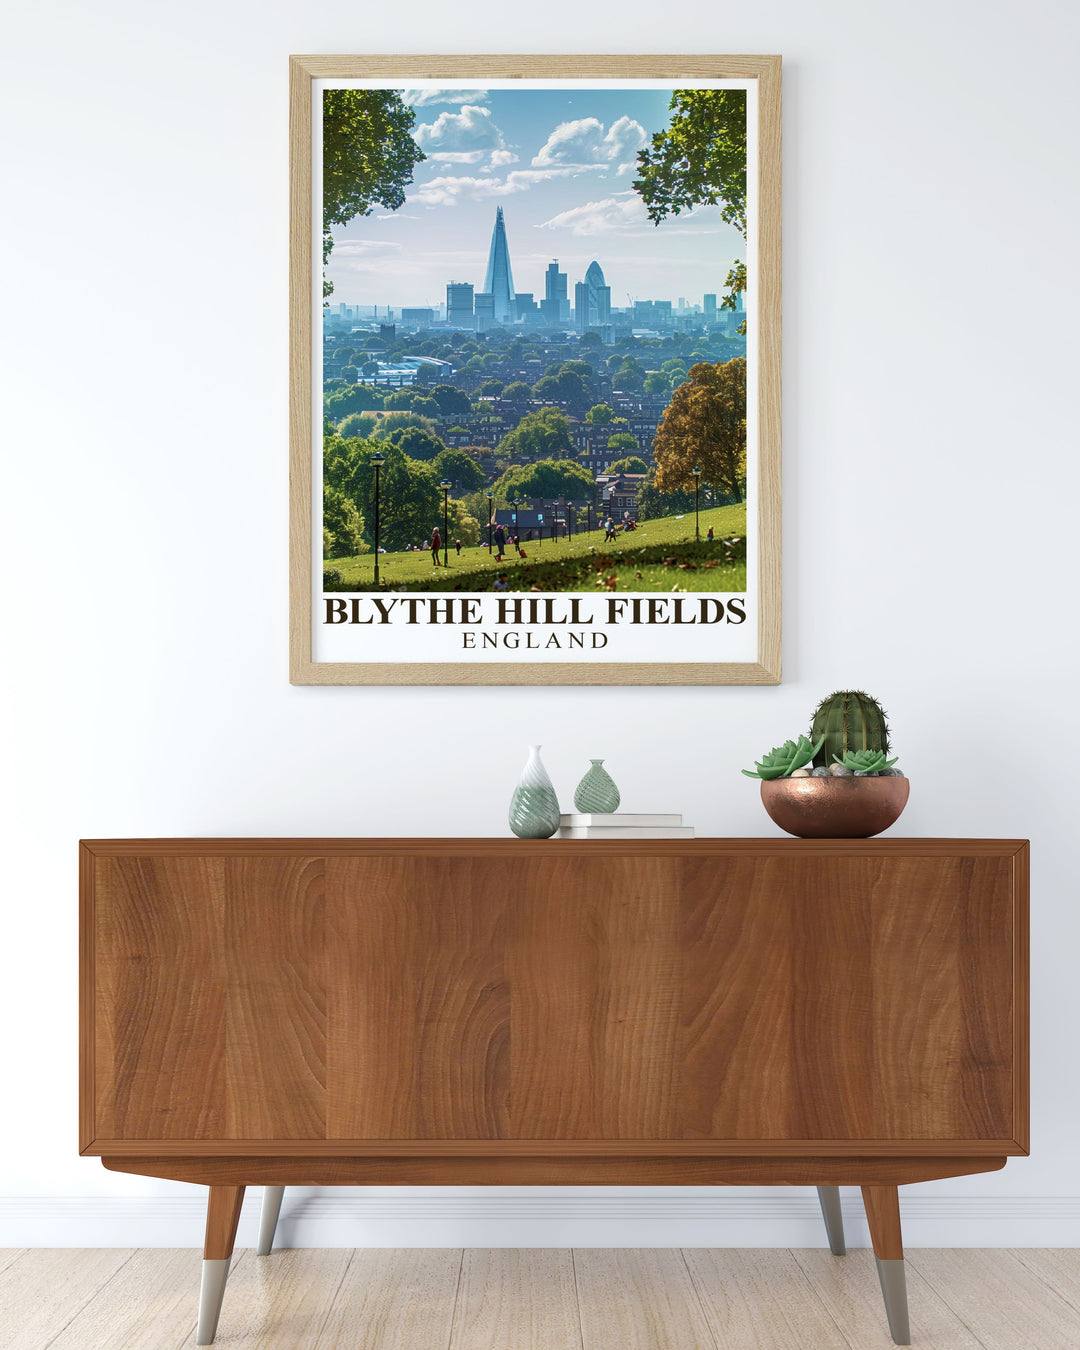 The natural beauty of Blythe Hill Fields and the expansive view of Londons skyline are captured in this travel poster, making it an excellent addition to any nature or urban landscape lovers collection.